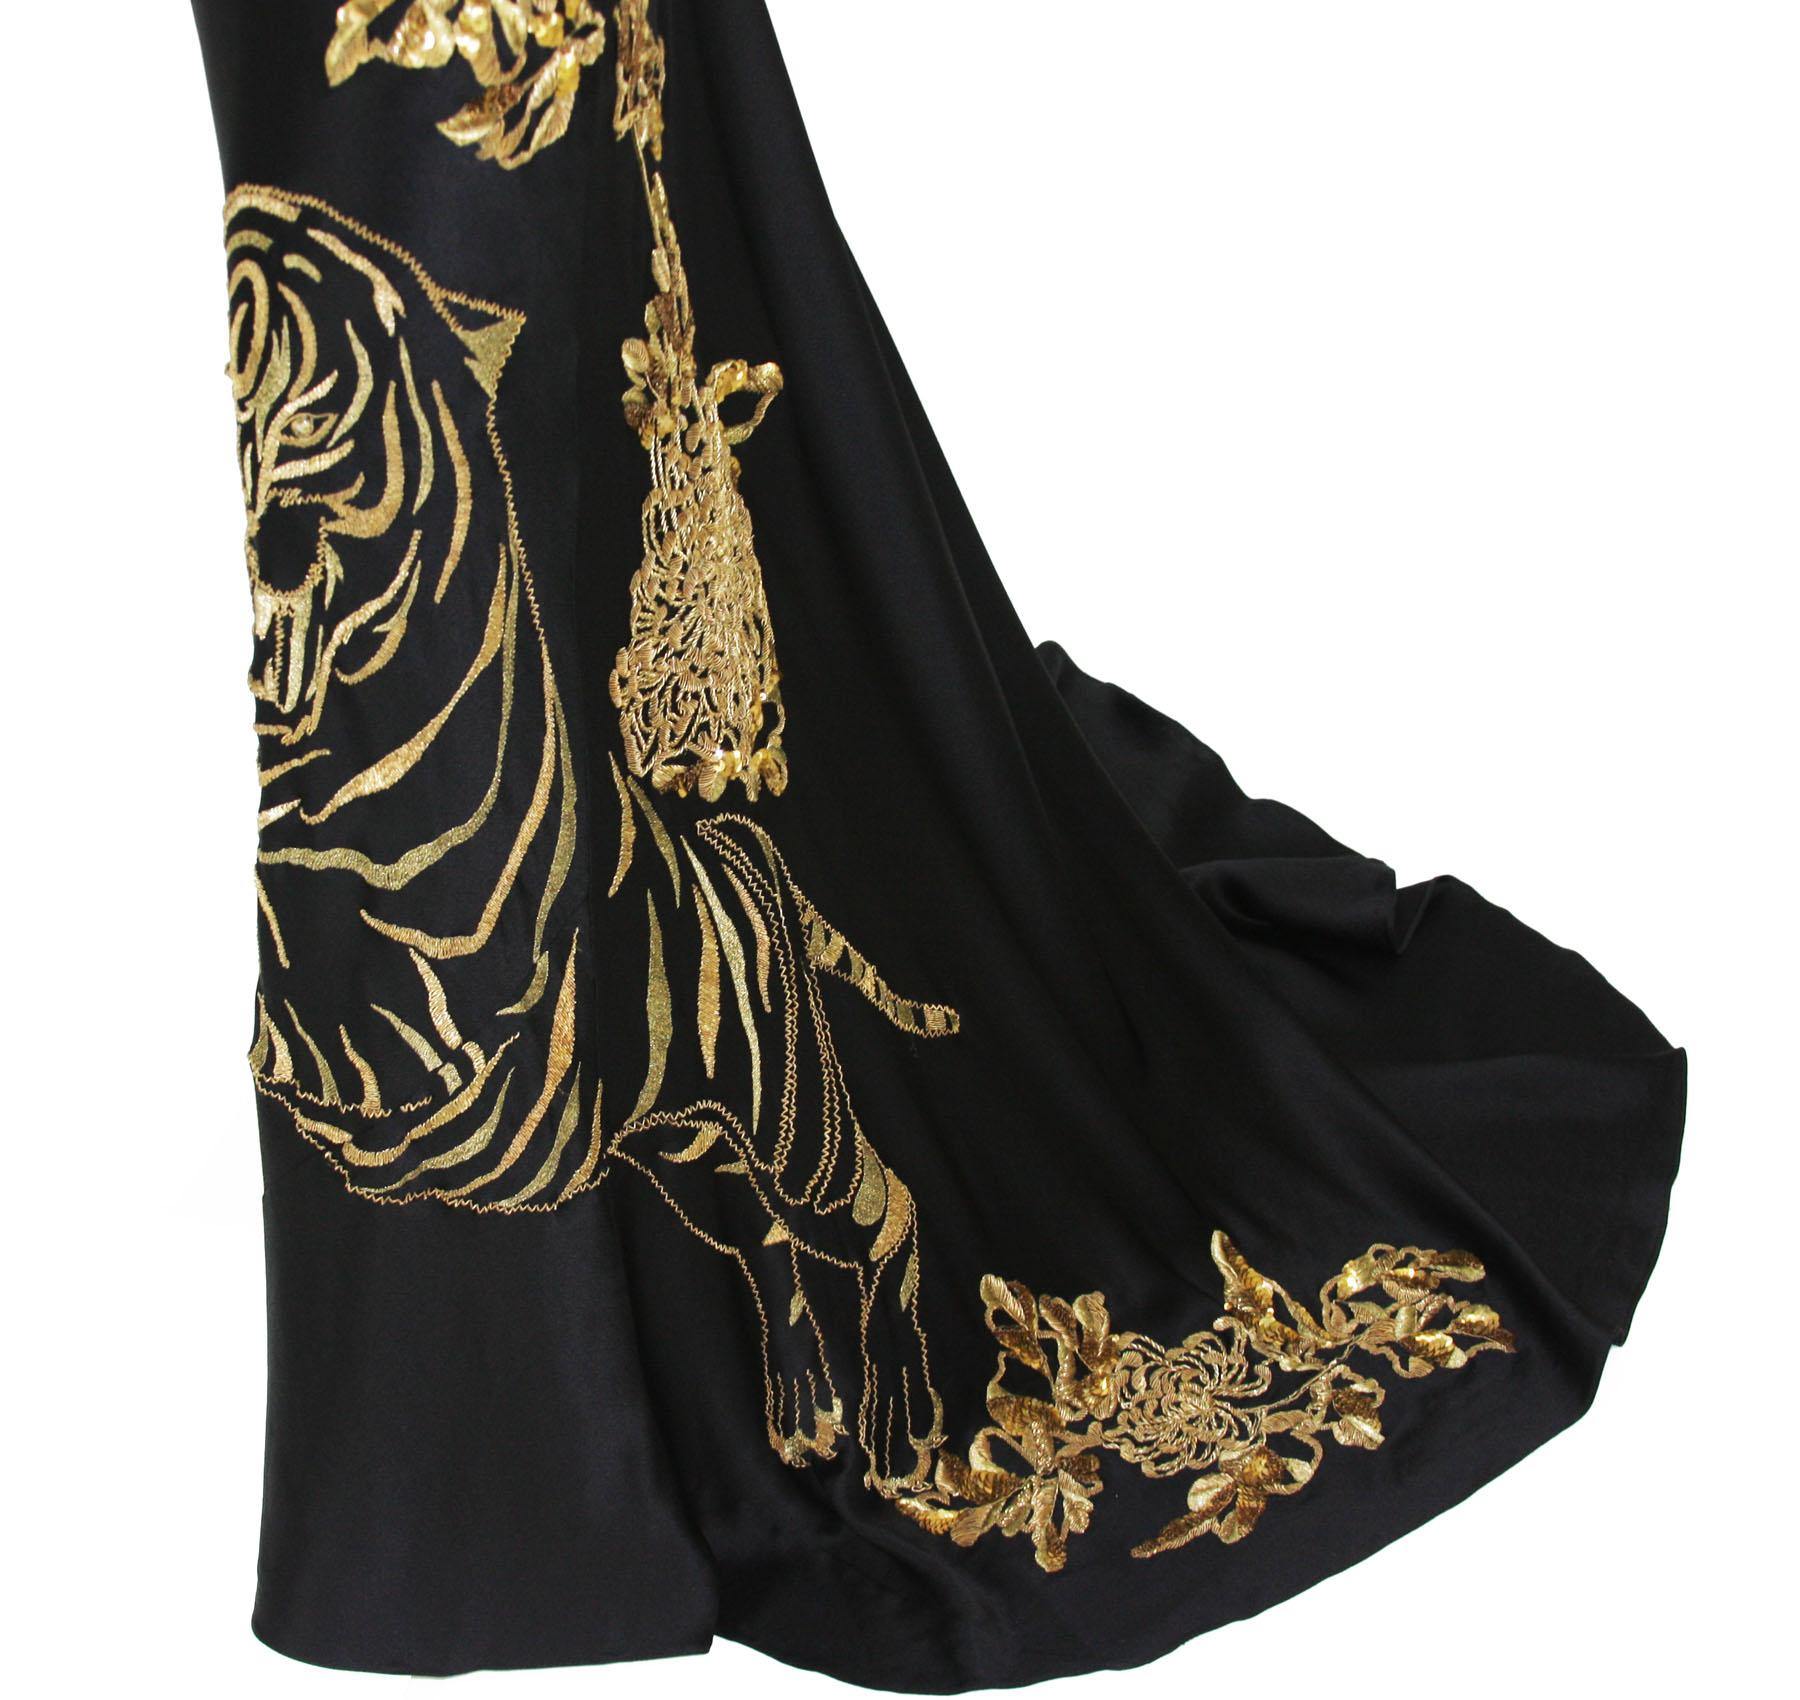 Black Alexander McQueen 2007 Gold Embroidered Tiger Dress 42 as seen on MARY STUART TV For Sale